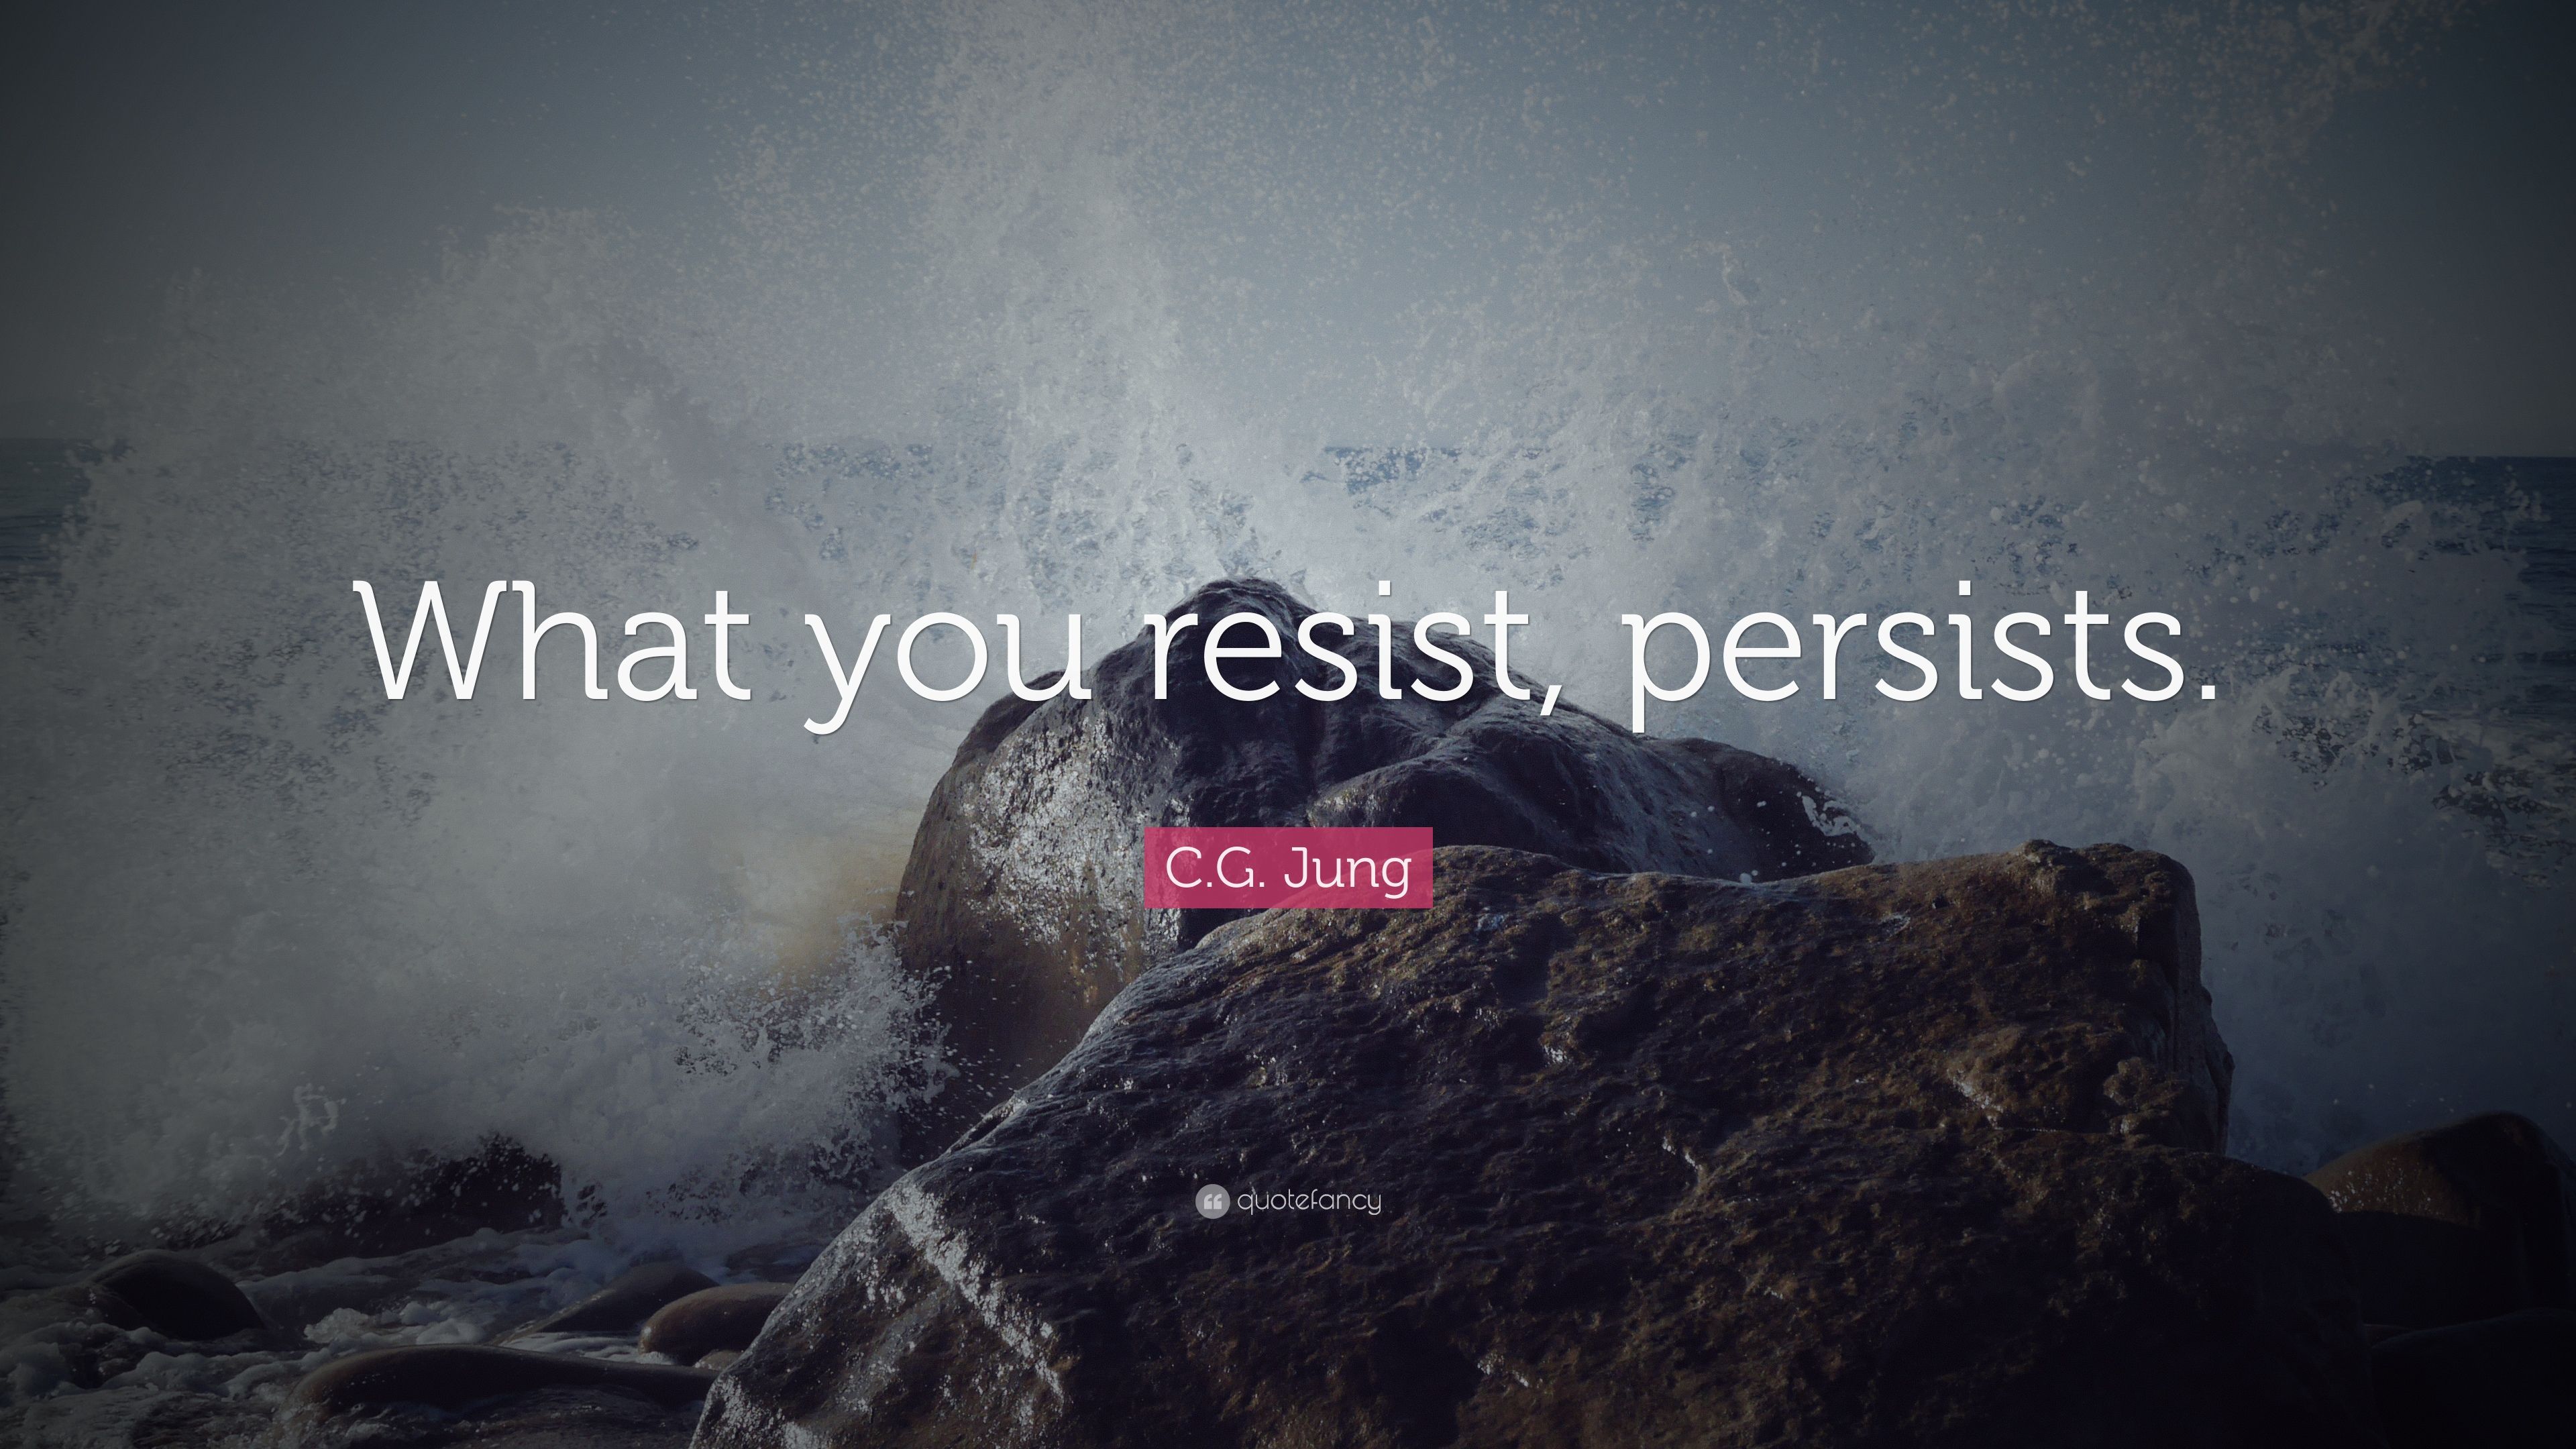 C.G. Jung Quote: “What you resist, persists.” (13 wallpaper)